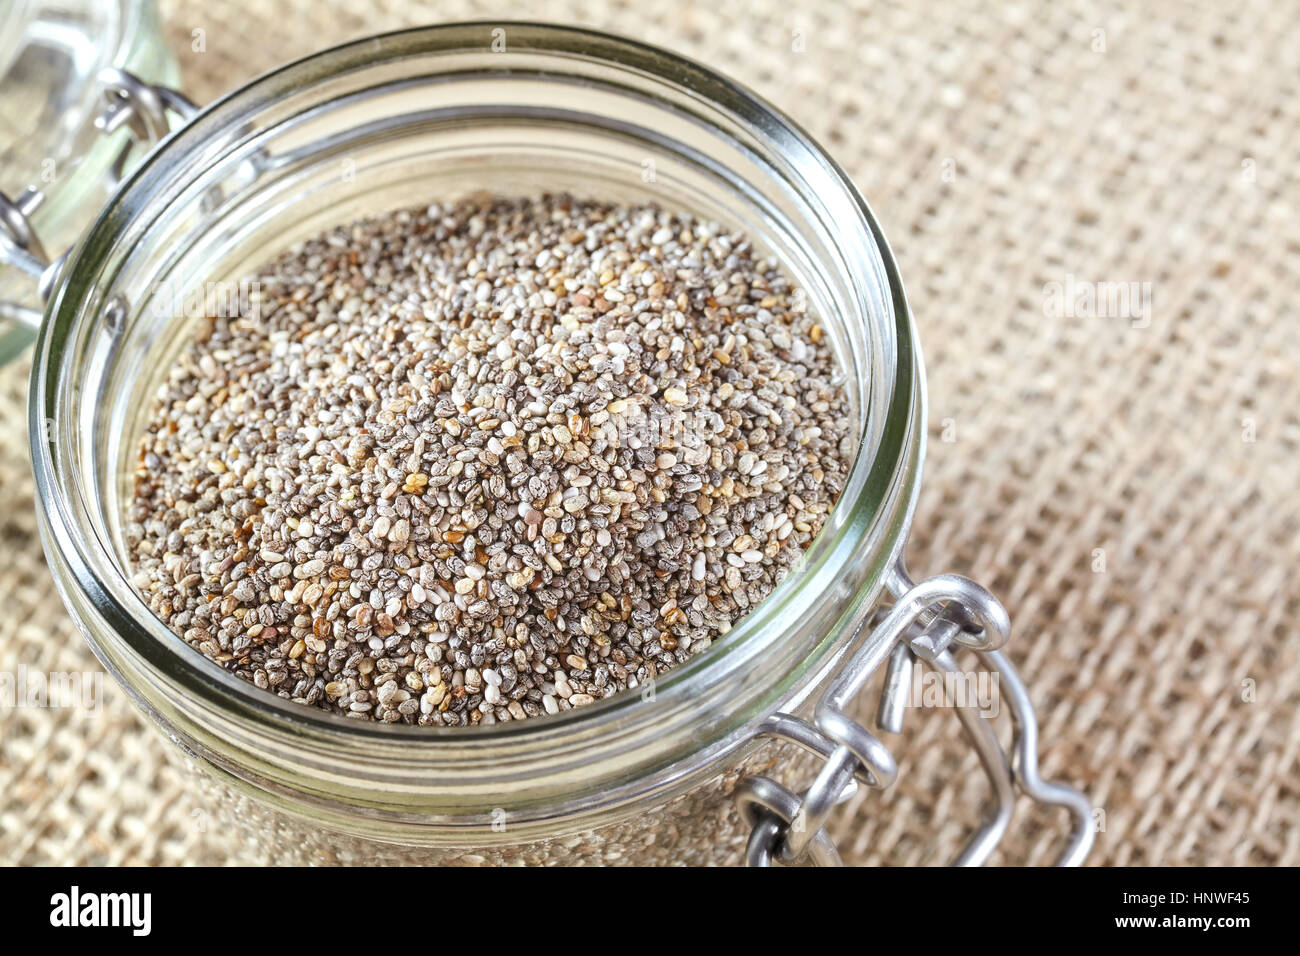 Close up of Chia seeds in a jar on linen background, food rich in omega-3 fatty acids. Stock Photo